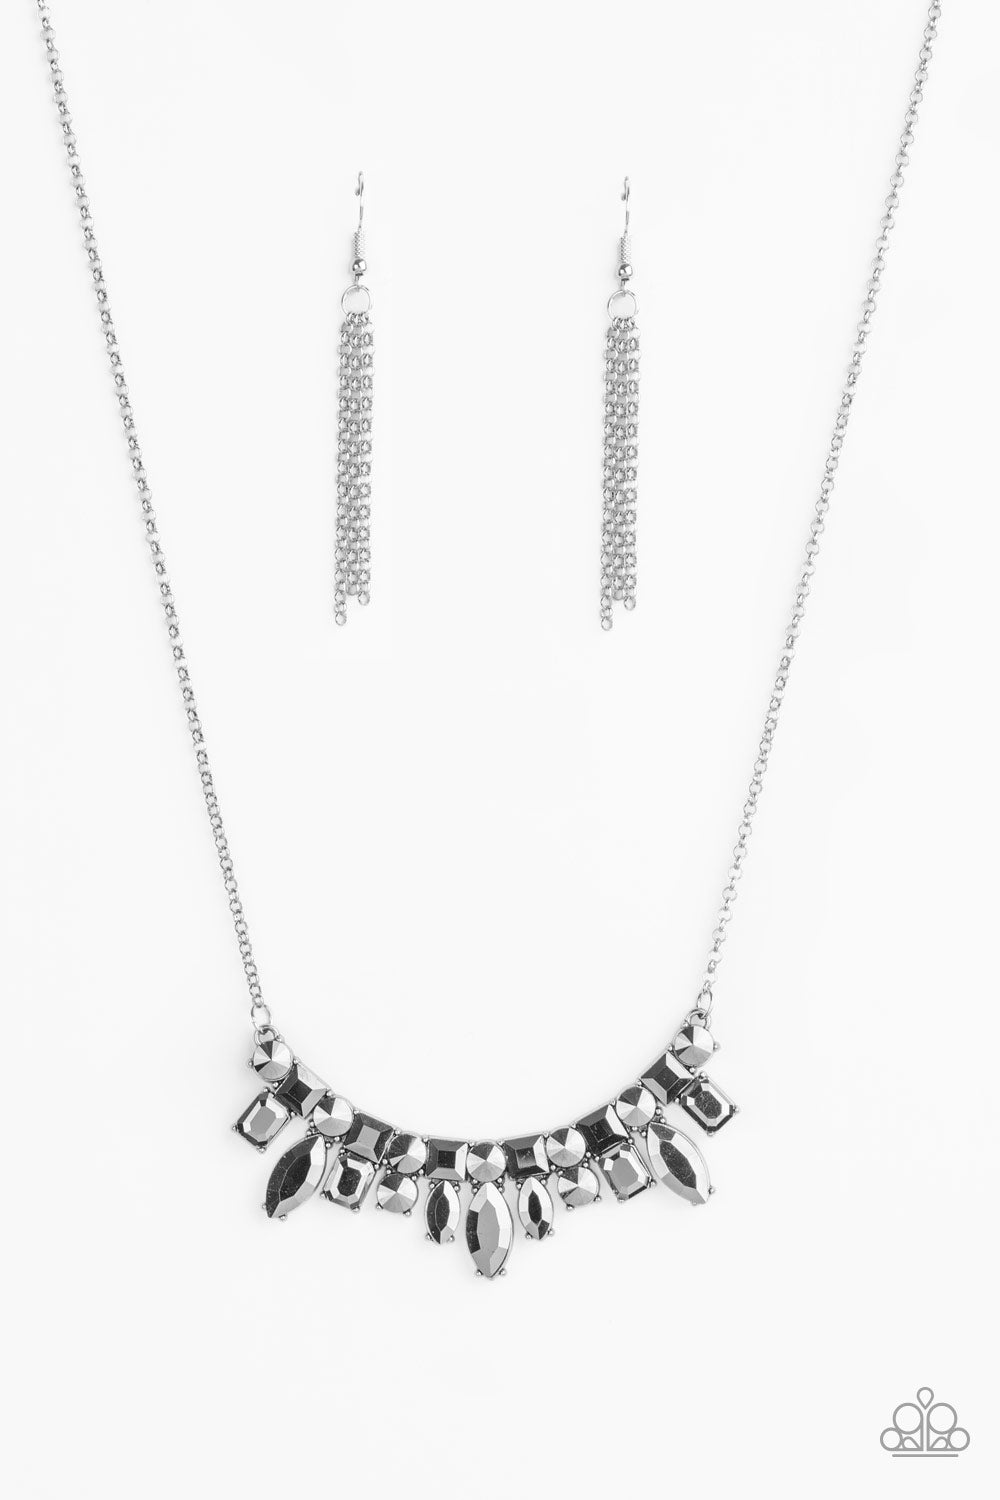 five-dollar-jewelry-wish-upon-a-rock-star-silver-necklace-paparazzi-accessories